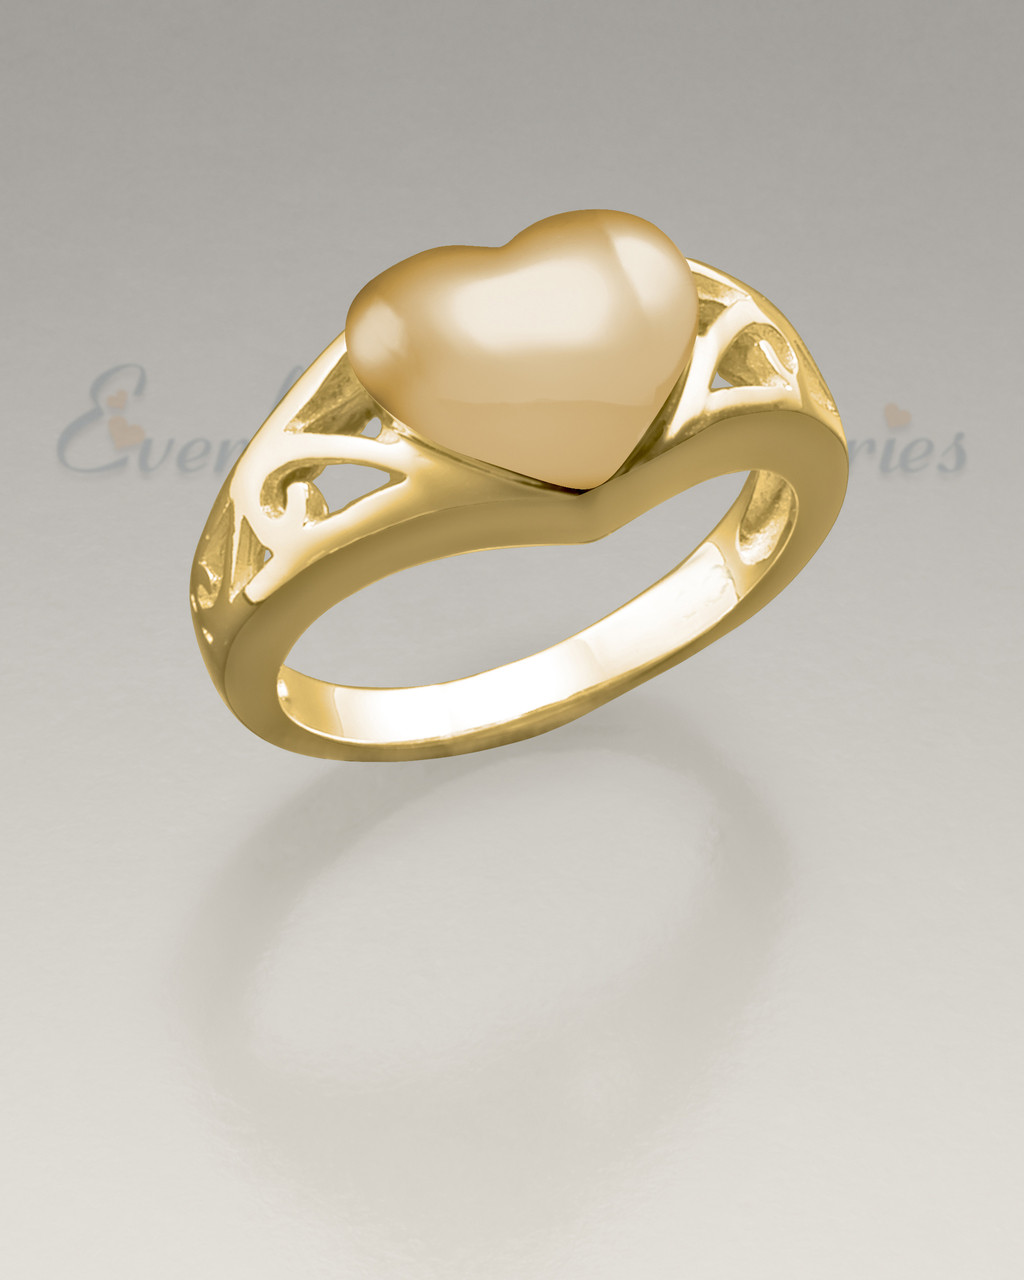 Women's 14K Gold Caring Heart Ring Jewelry Urn